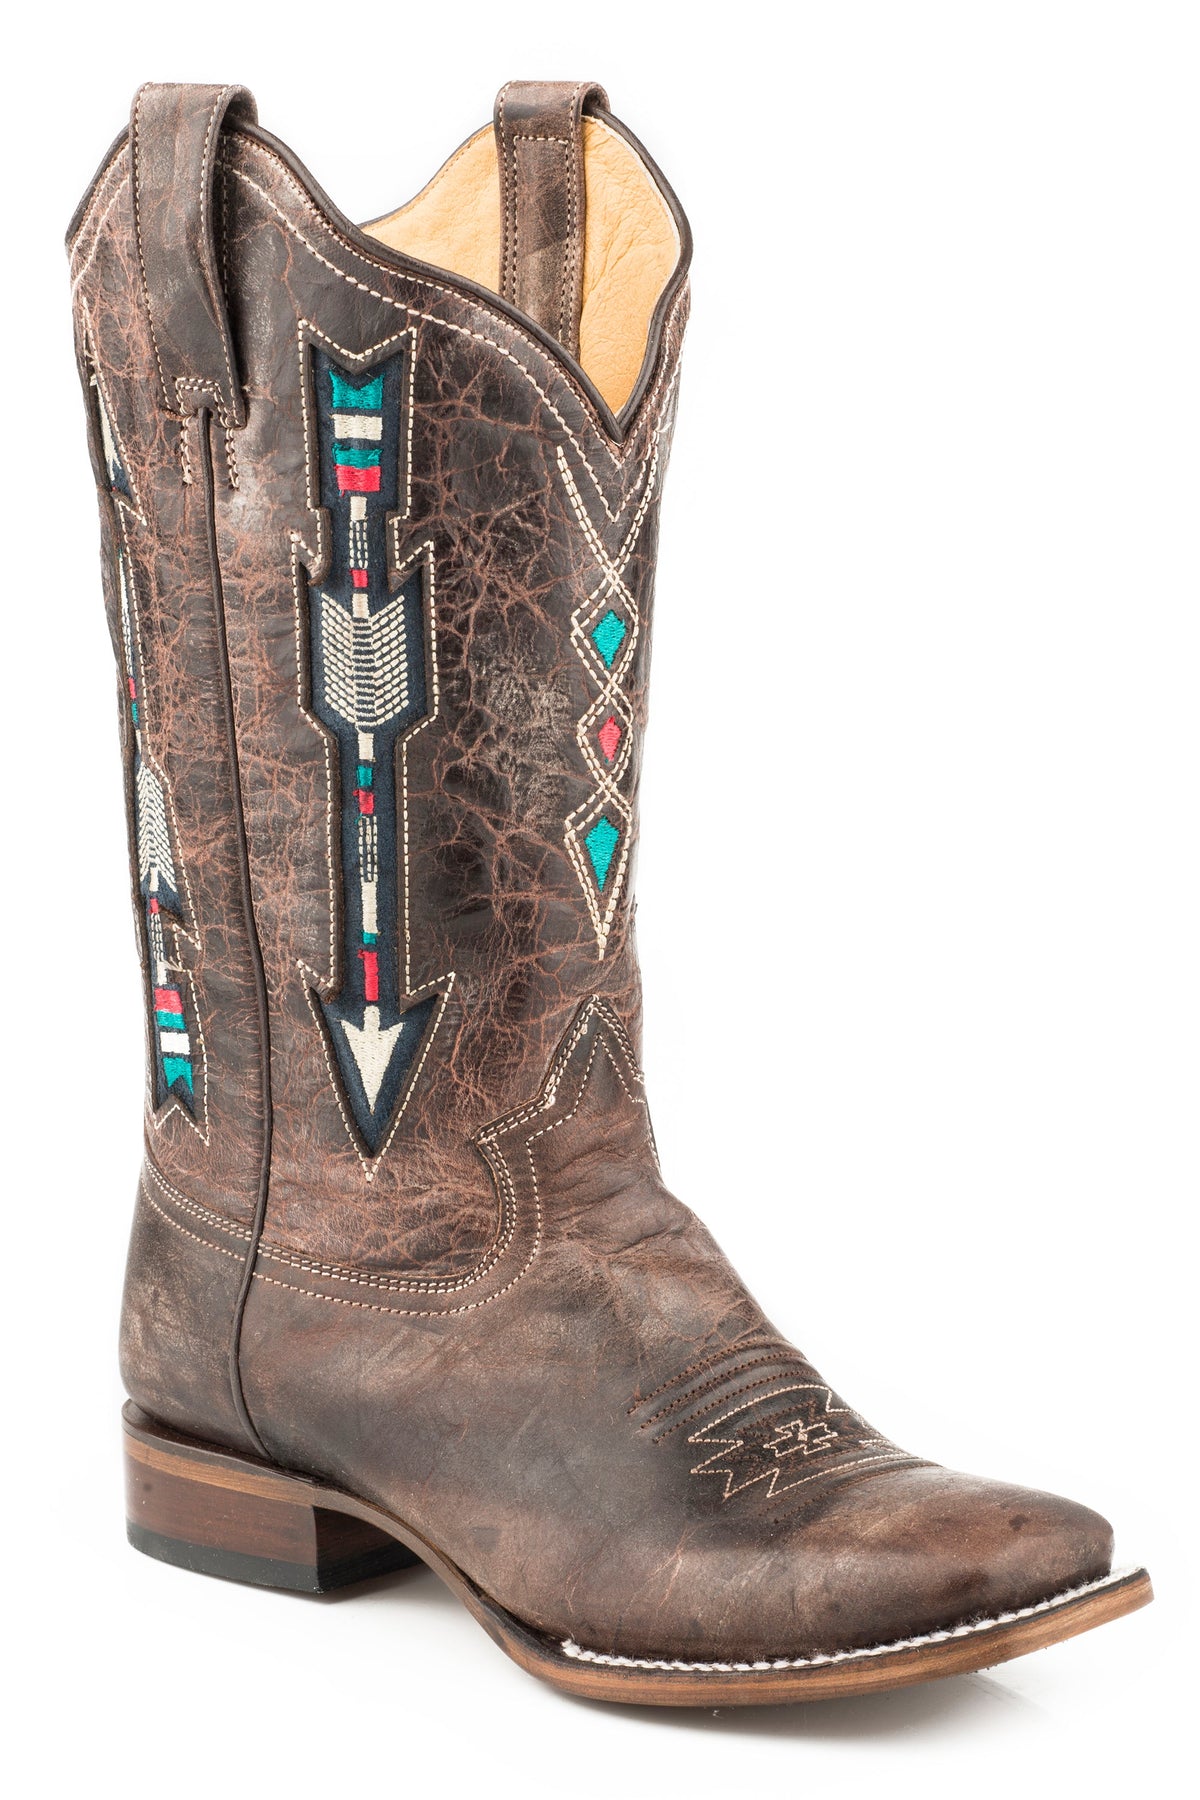 Roper Womens Wide Calf Leather Cowboy Boot Waxy Brown With Embroidered Arrow Underlay Design